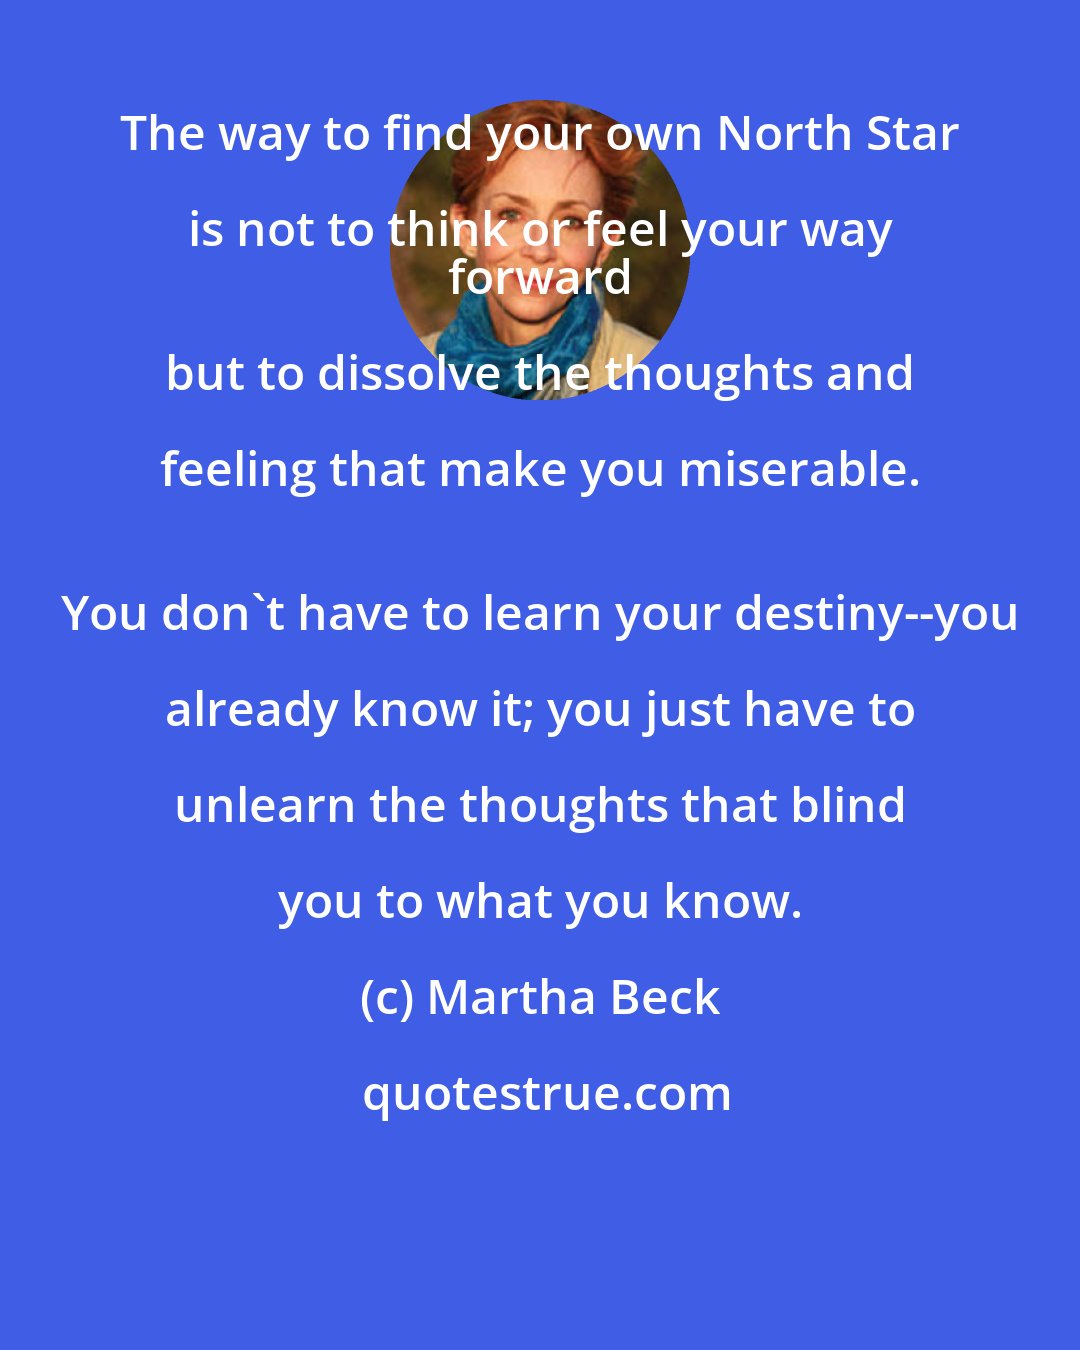 Martha Beck: The way to find your own North Star is not to think or feel your way 
 forward but to dissolve the thoughts and feeling that make you miserable. 
 You don't have to learn your destiny--you already know it; you just have to unlearn the thoughts that blind you to what you know.